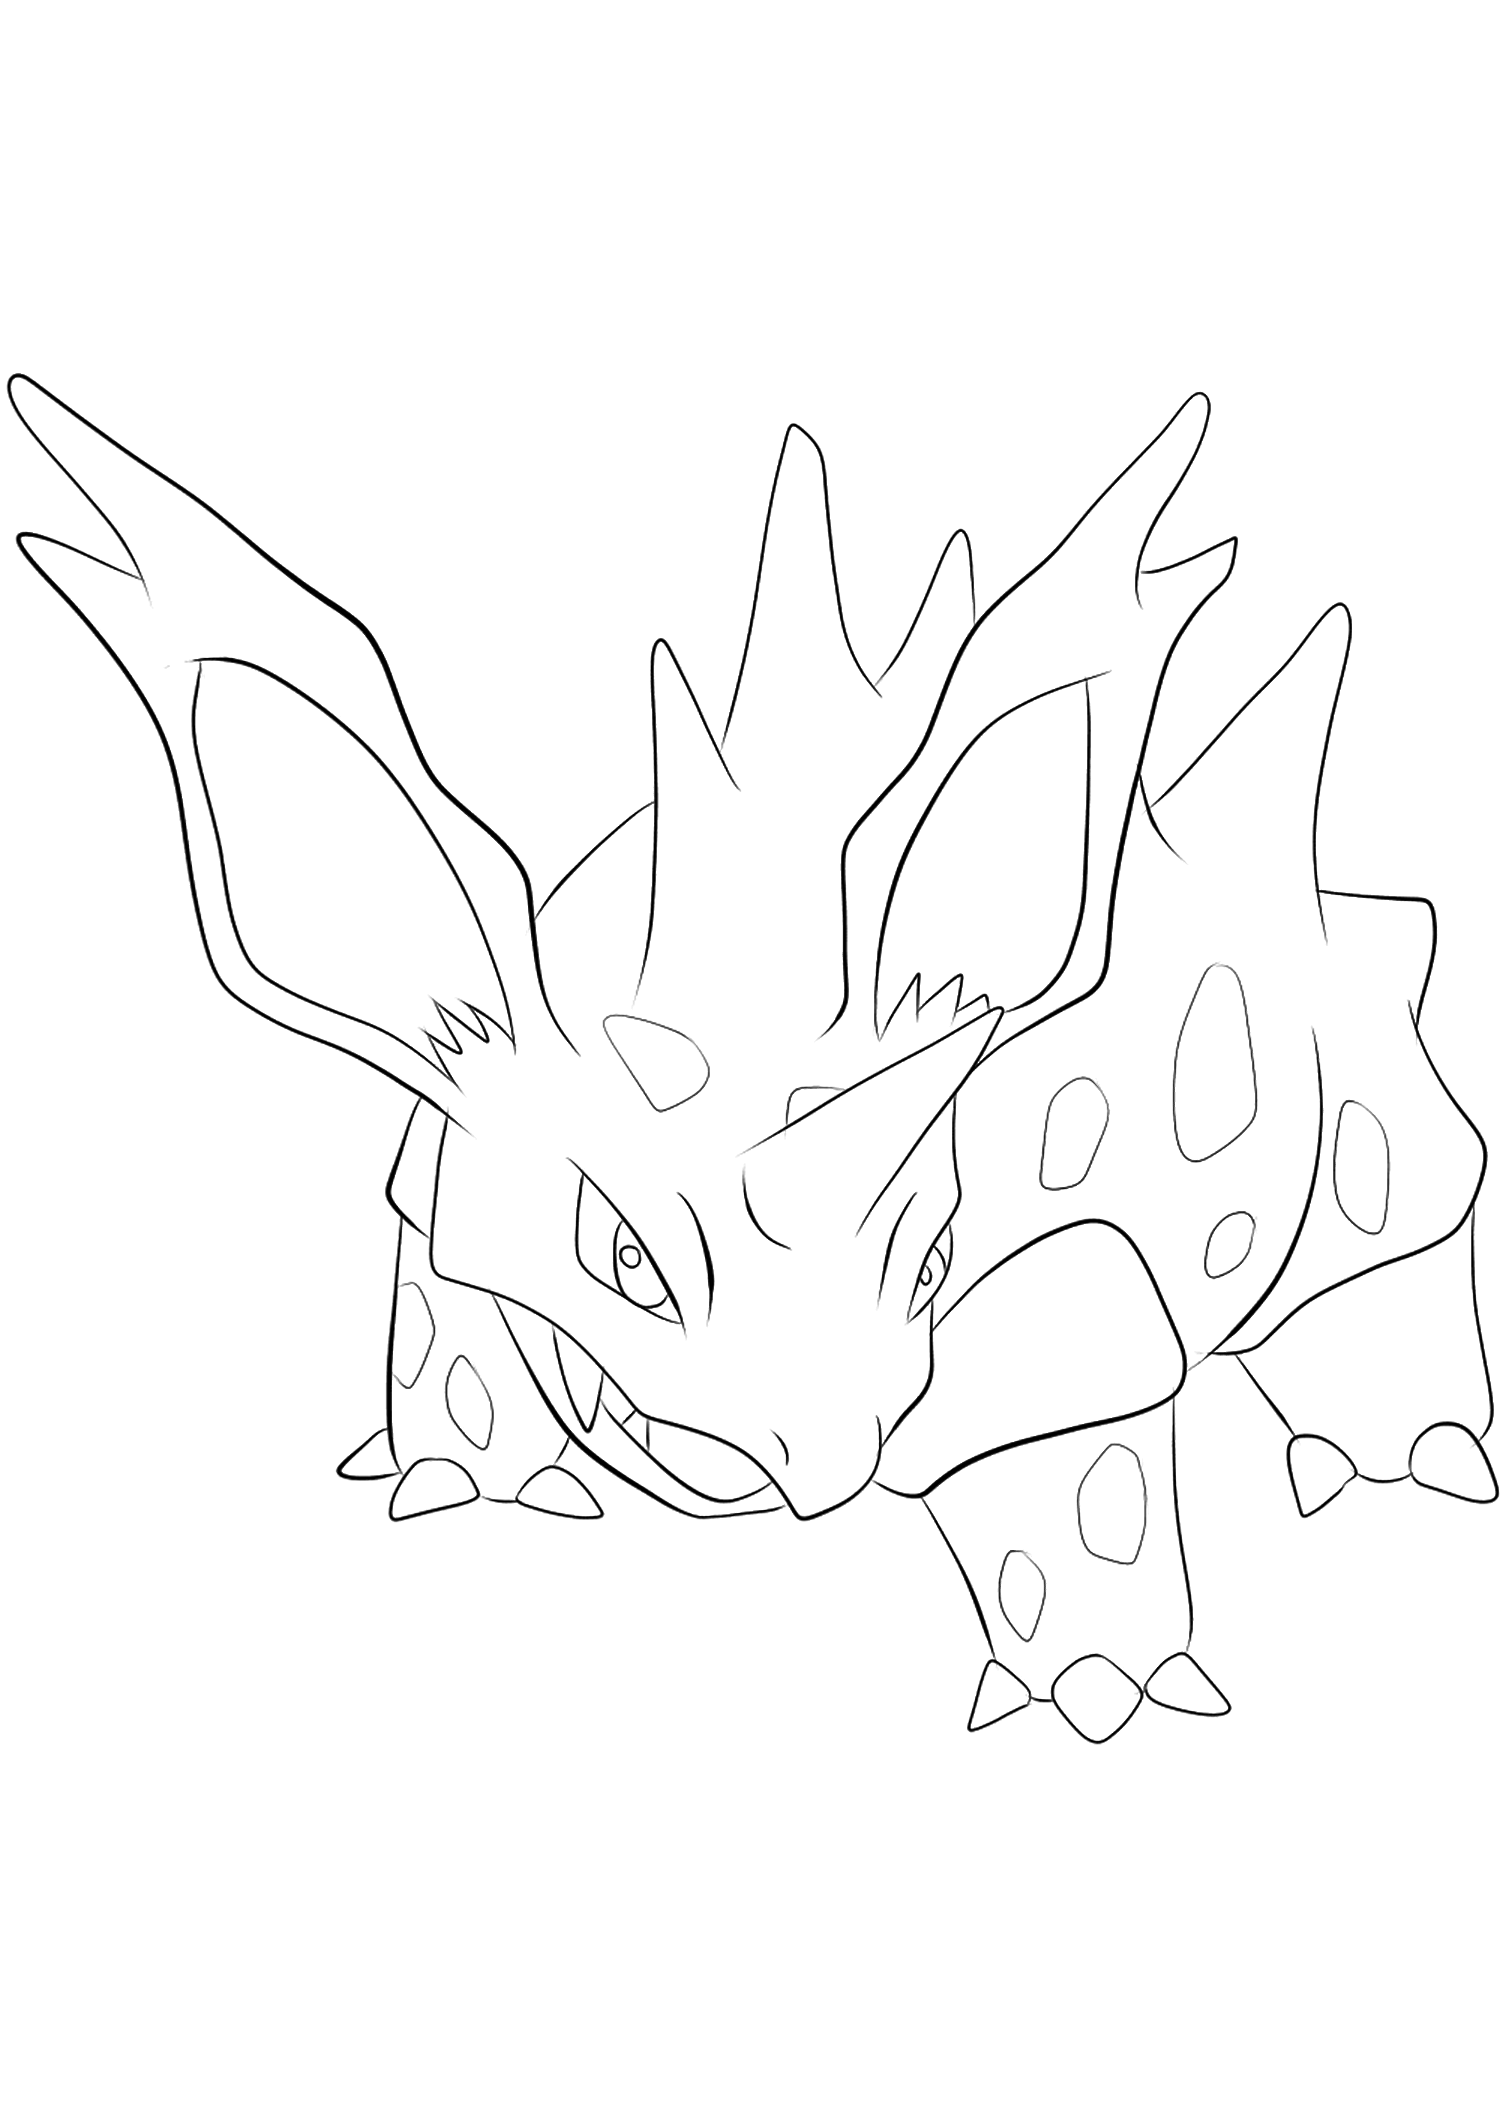 Nidorino (No.33). Nidorino Coloring page, Generation I Pokemon of type PoisonOriginal image credit: Pokemon linearts by Lilly Gerbil'font-size:smaller;color:gray'>Permission: All rights reserved © Pokemon company and Ken Sugimori.